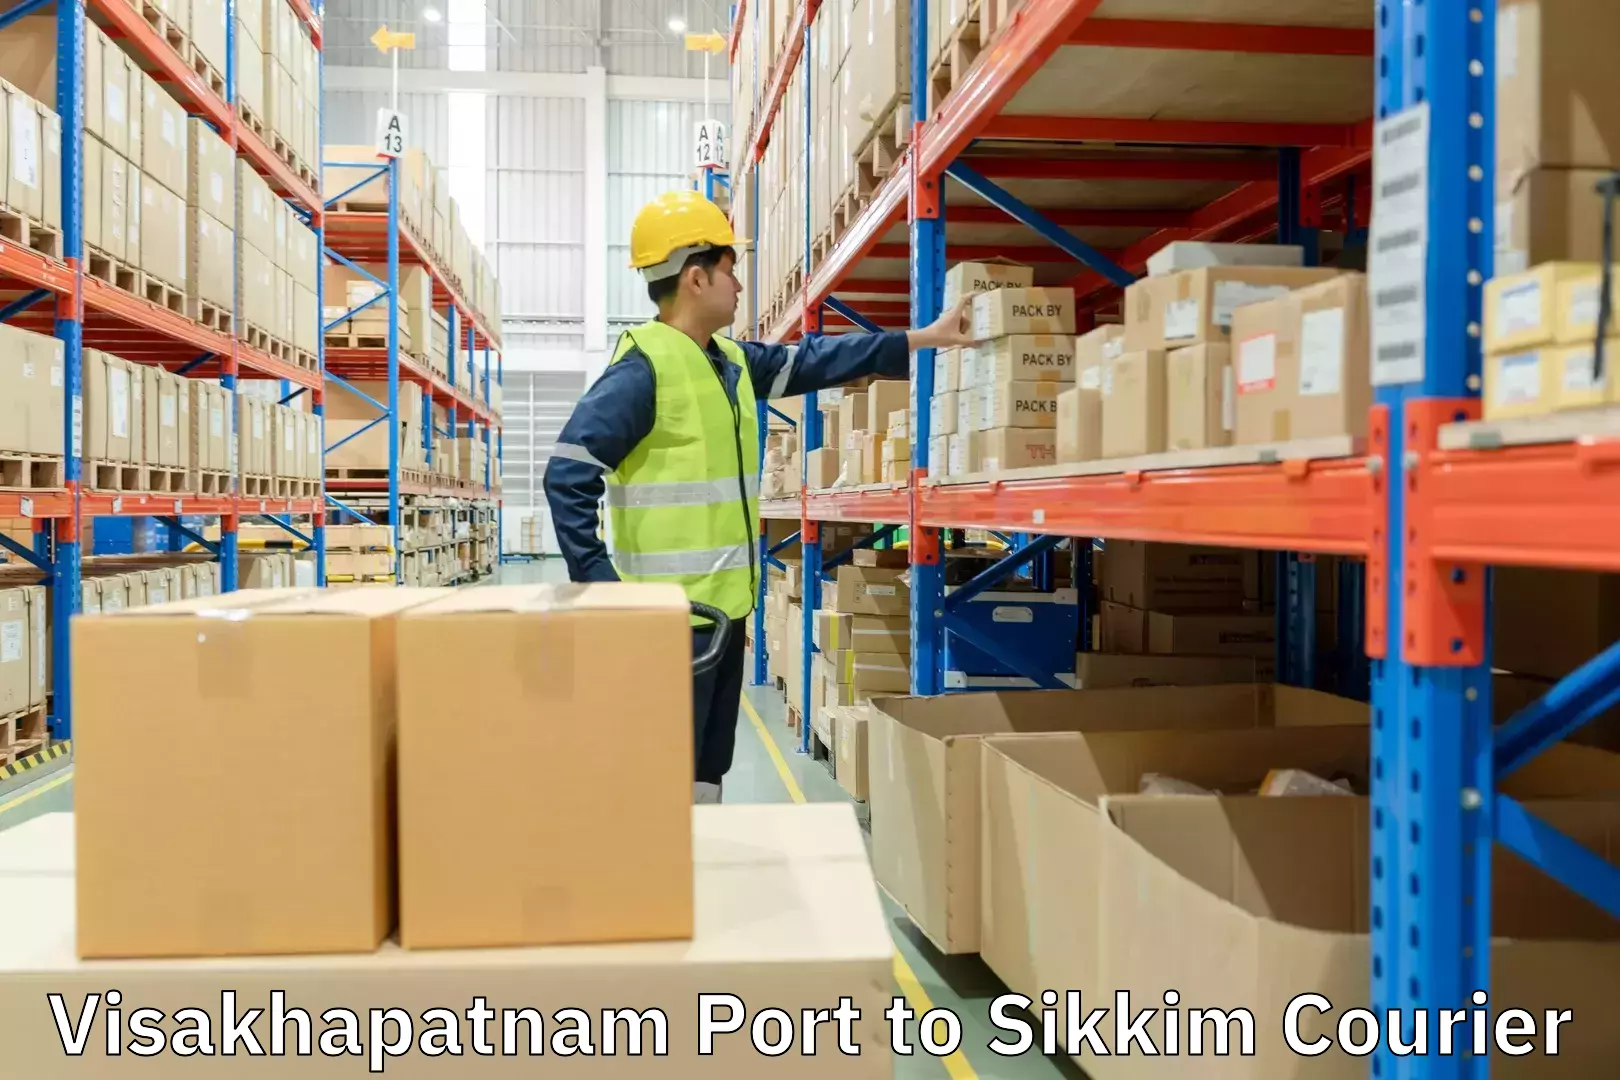 Express courier facilities Visakhapatnam Port to Sikkim